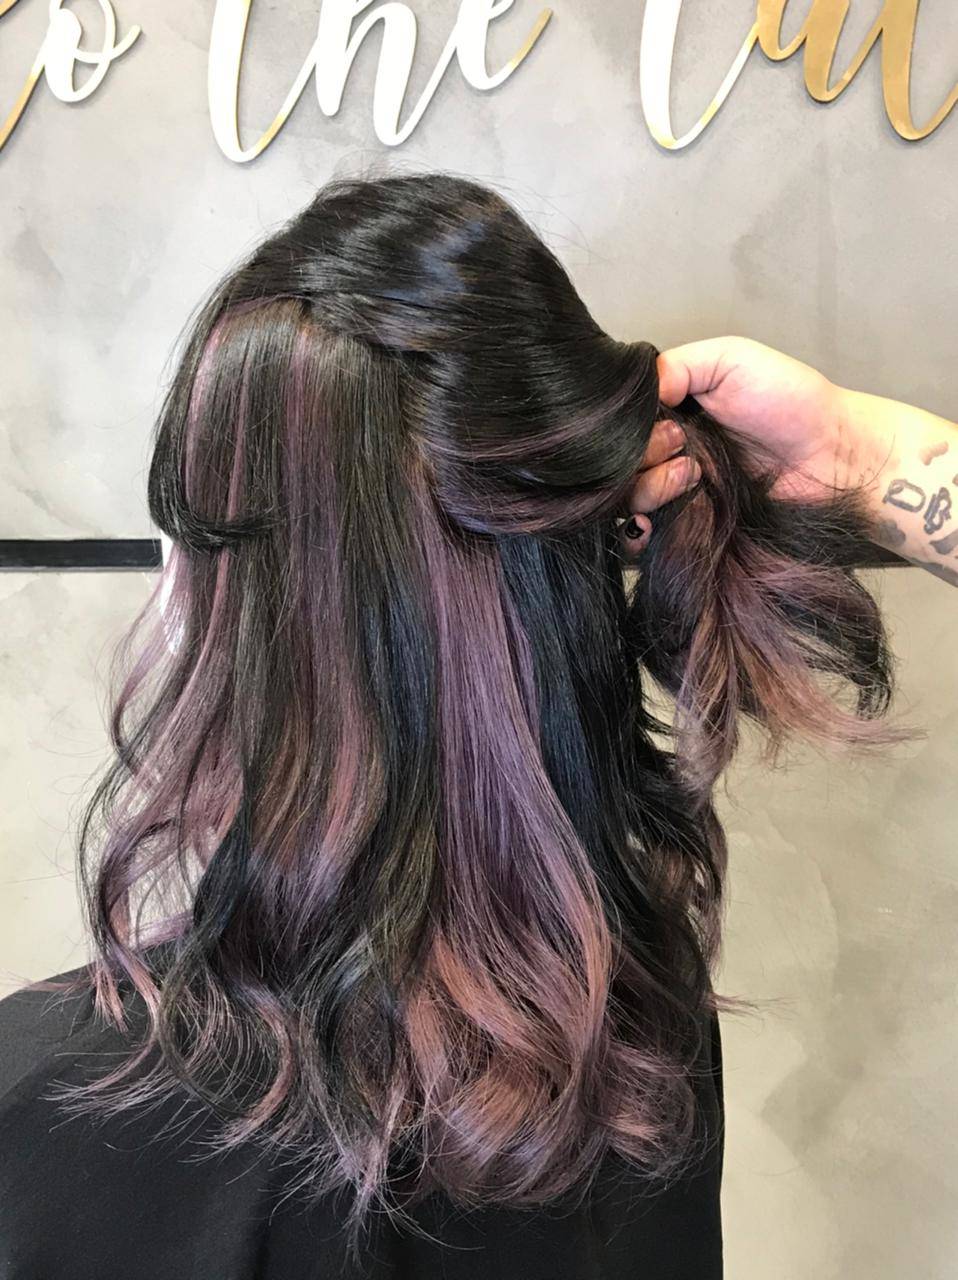 This Season's Hottest Hair Color Trend